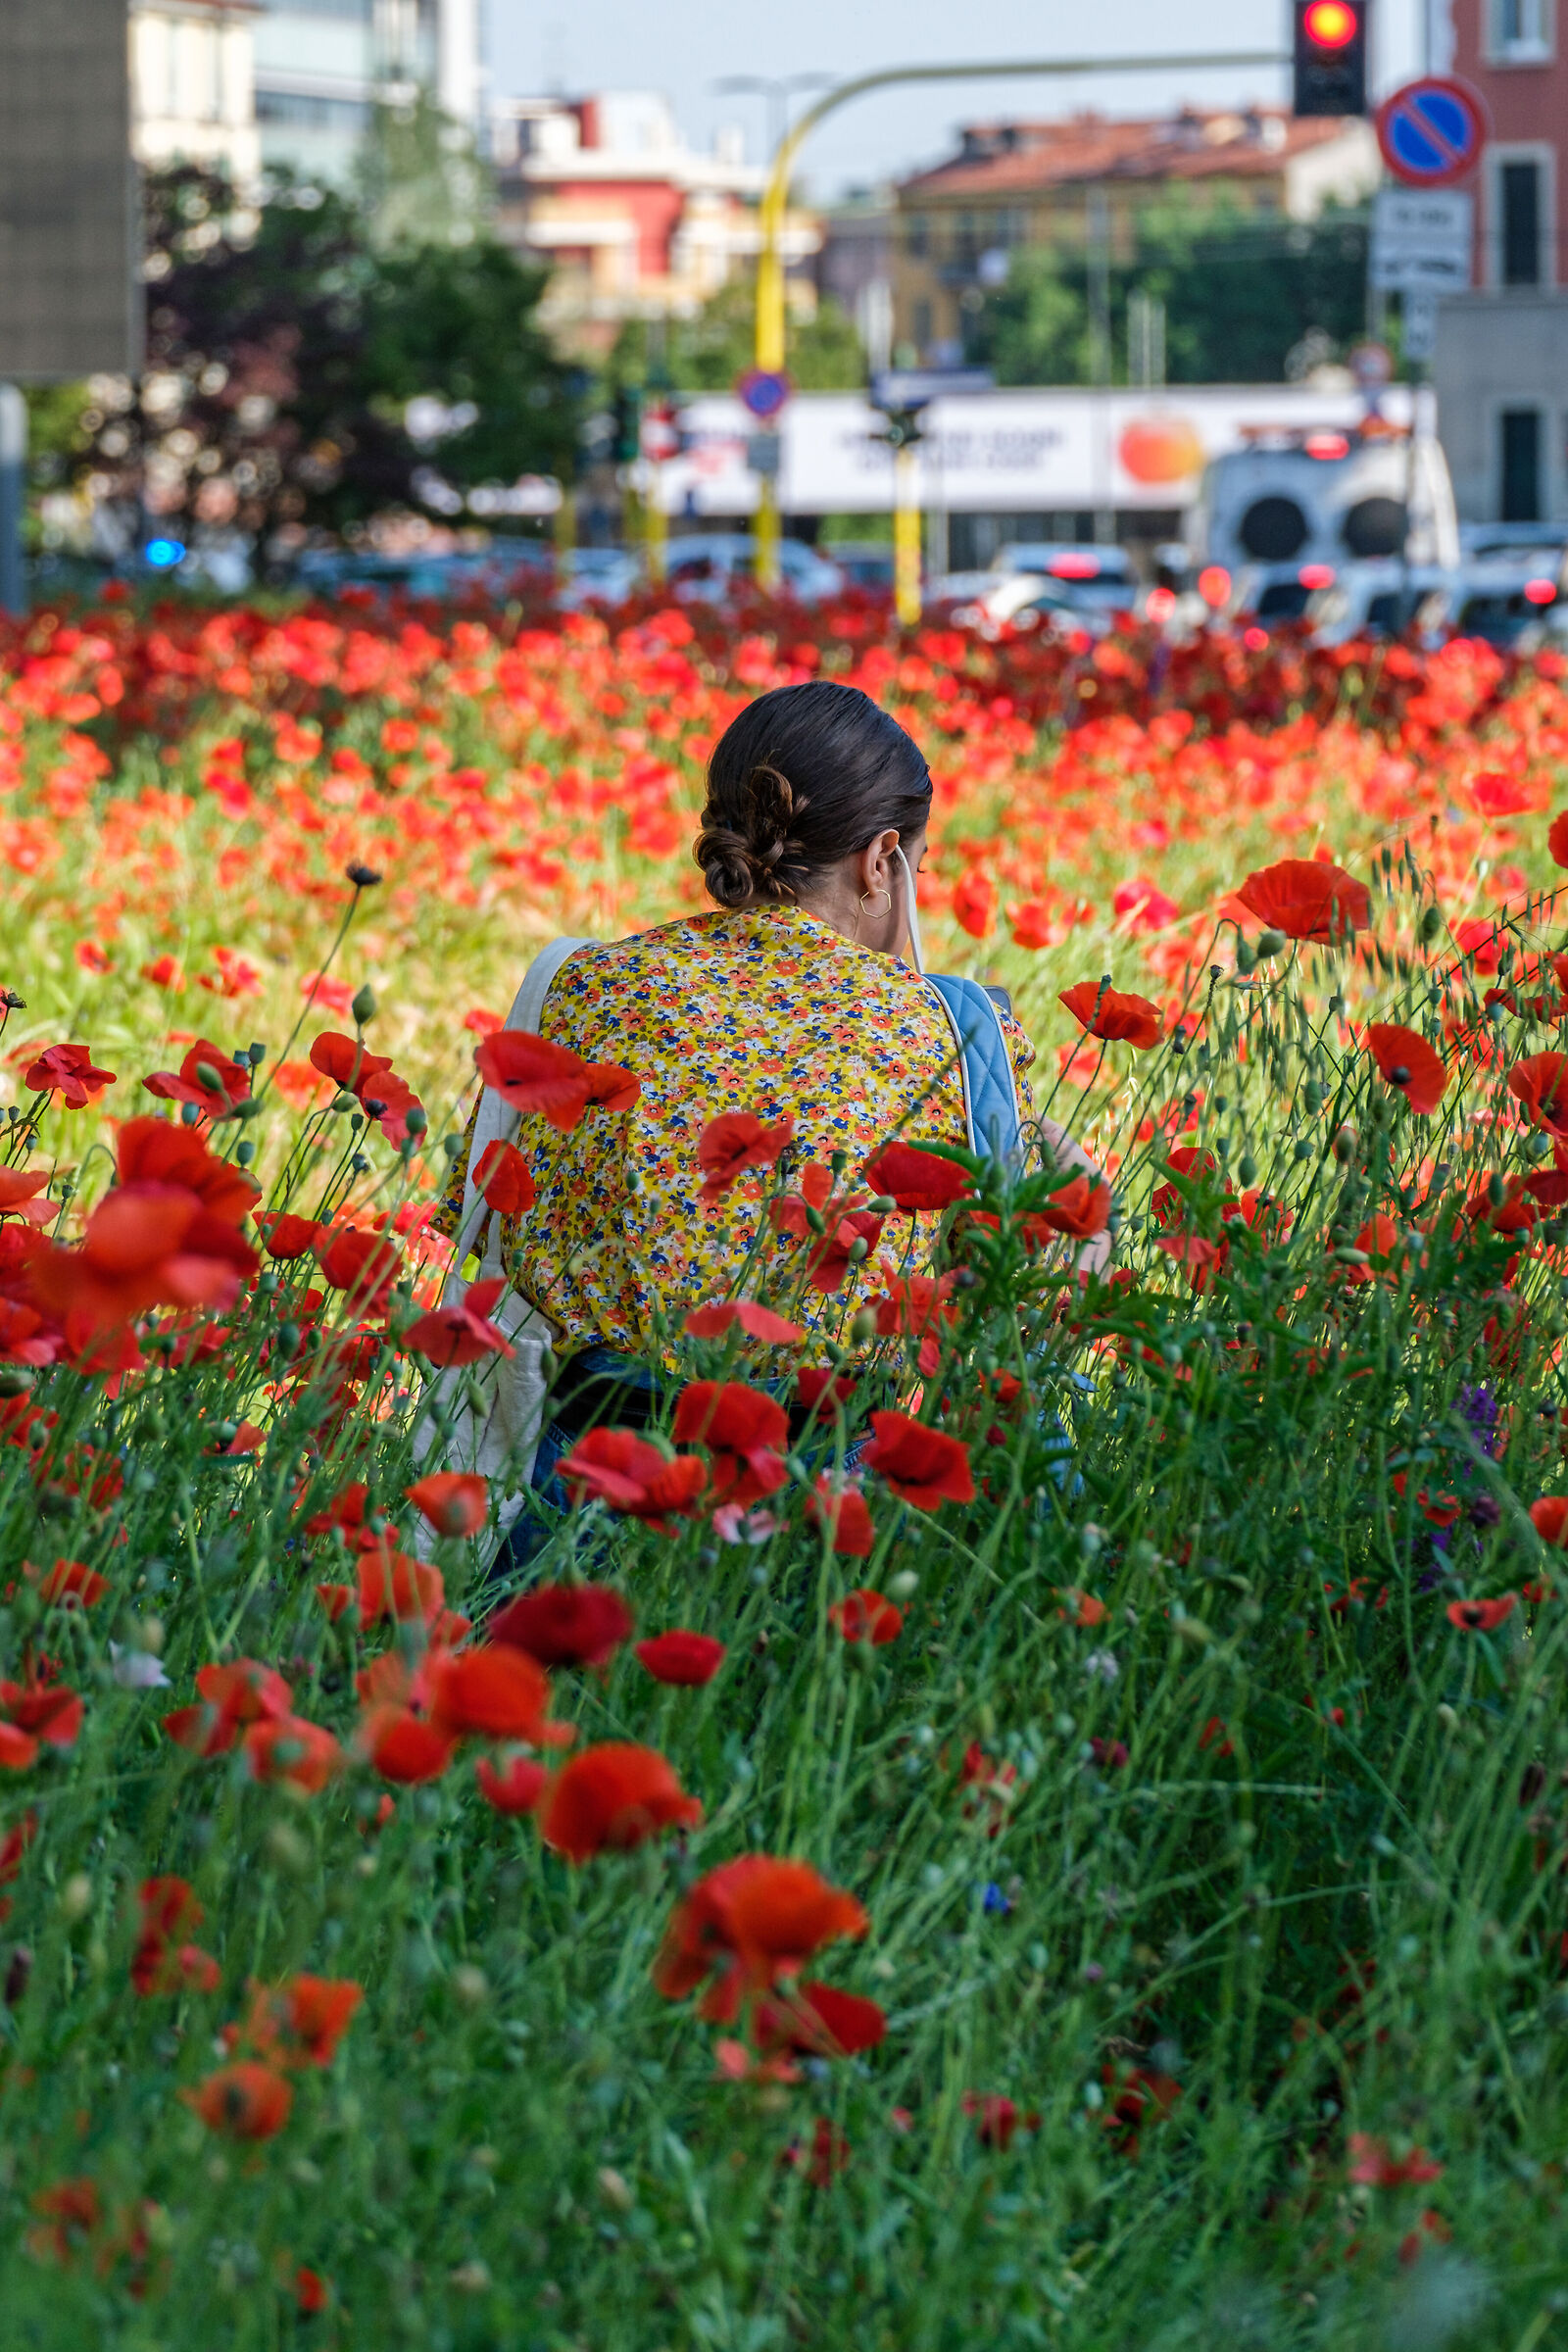 Among the Poppies...